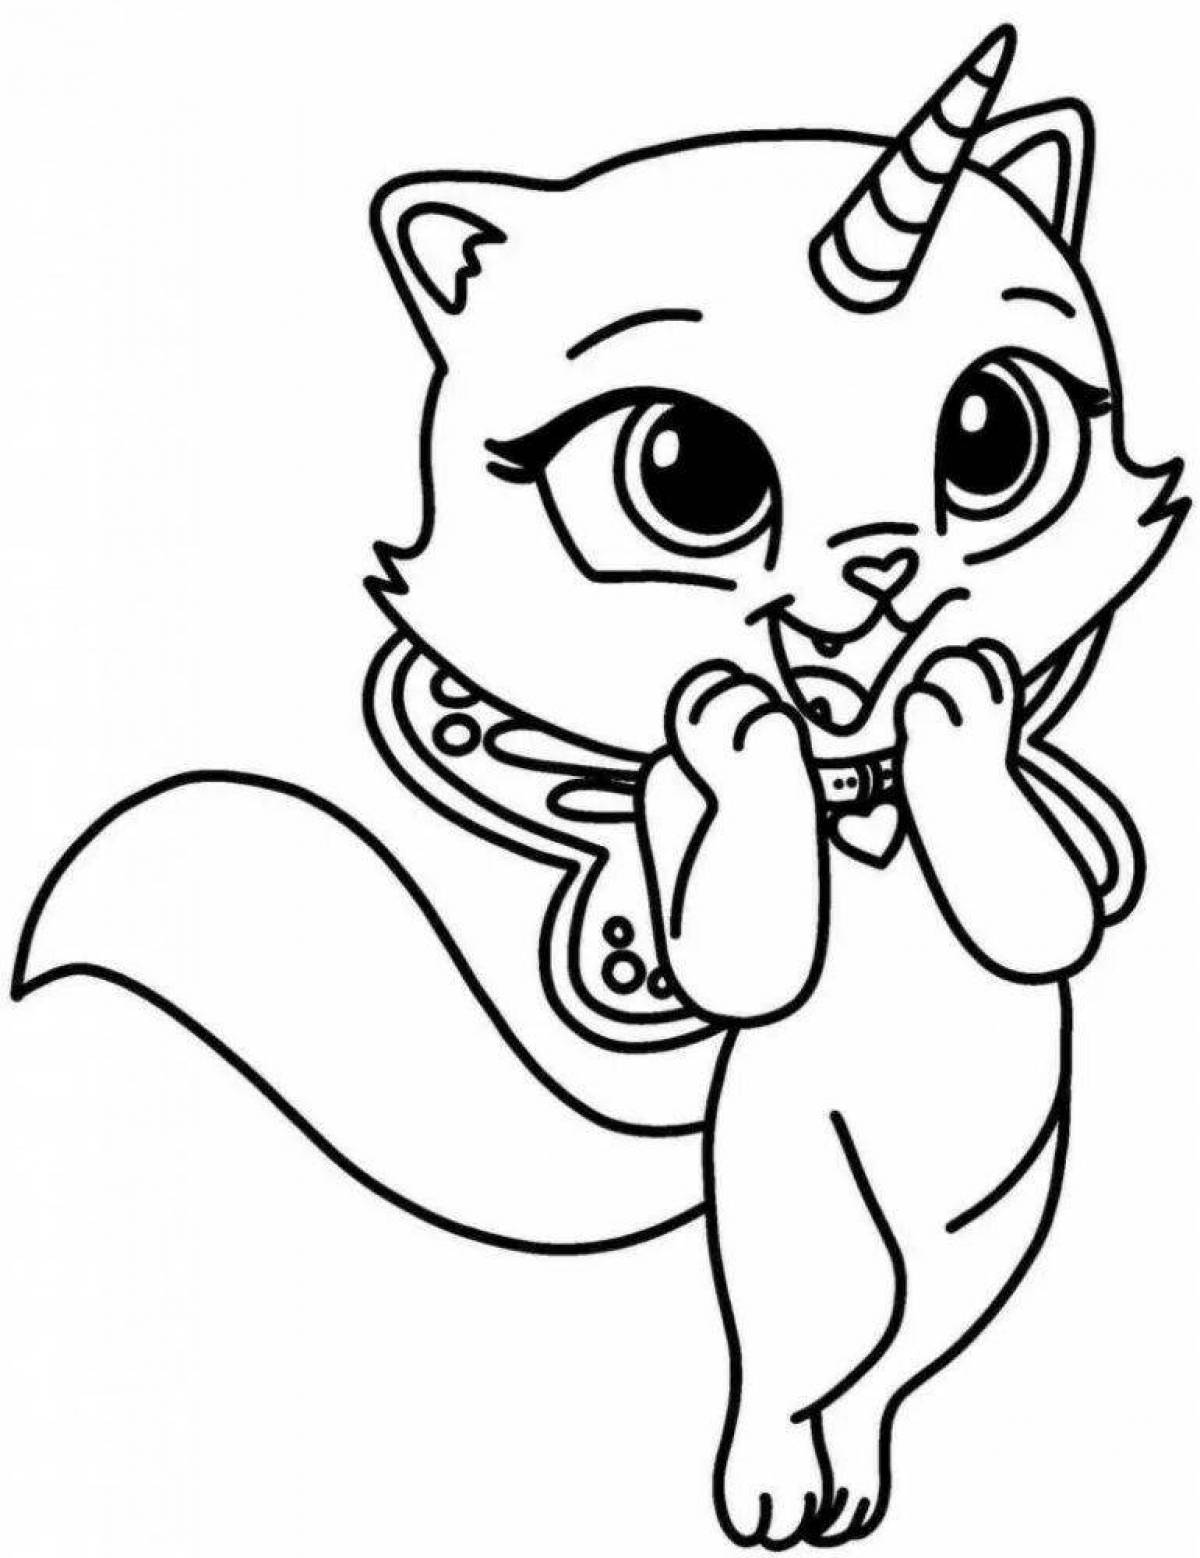 Coloring book sly cute cat